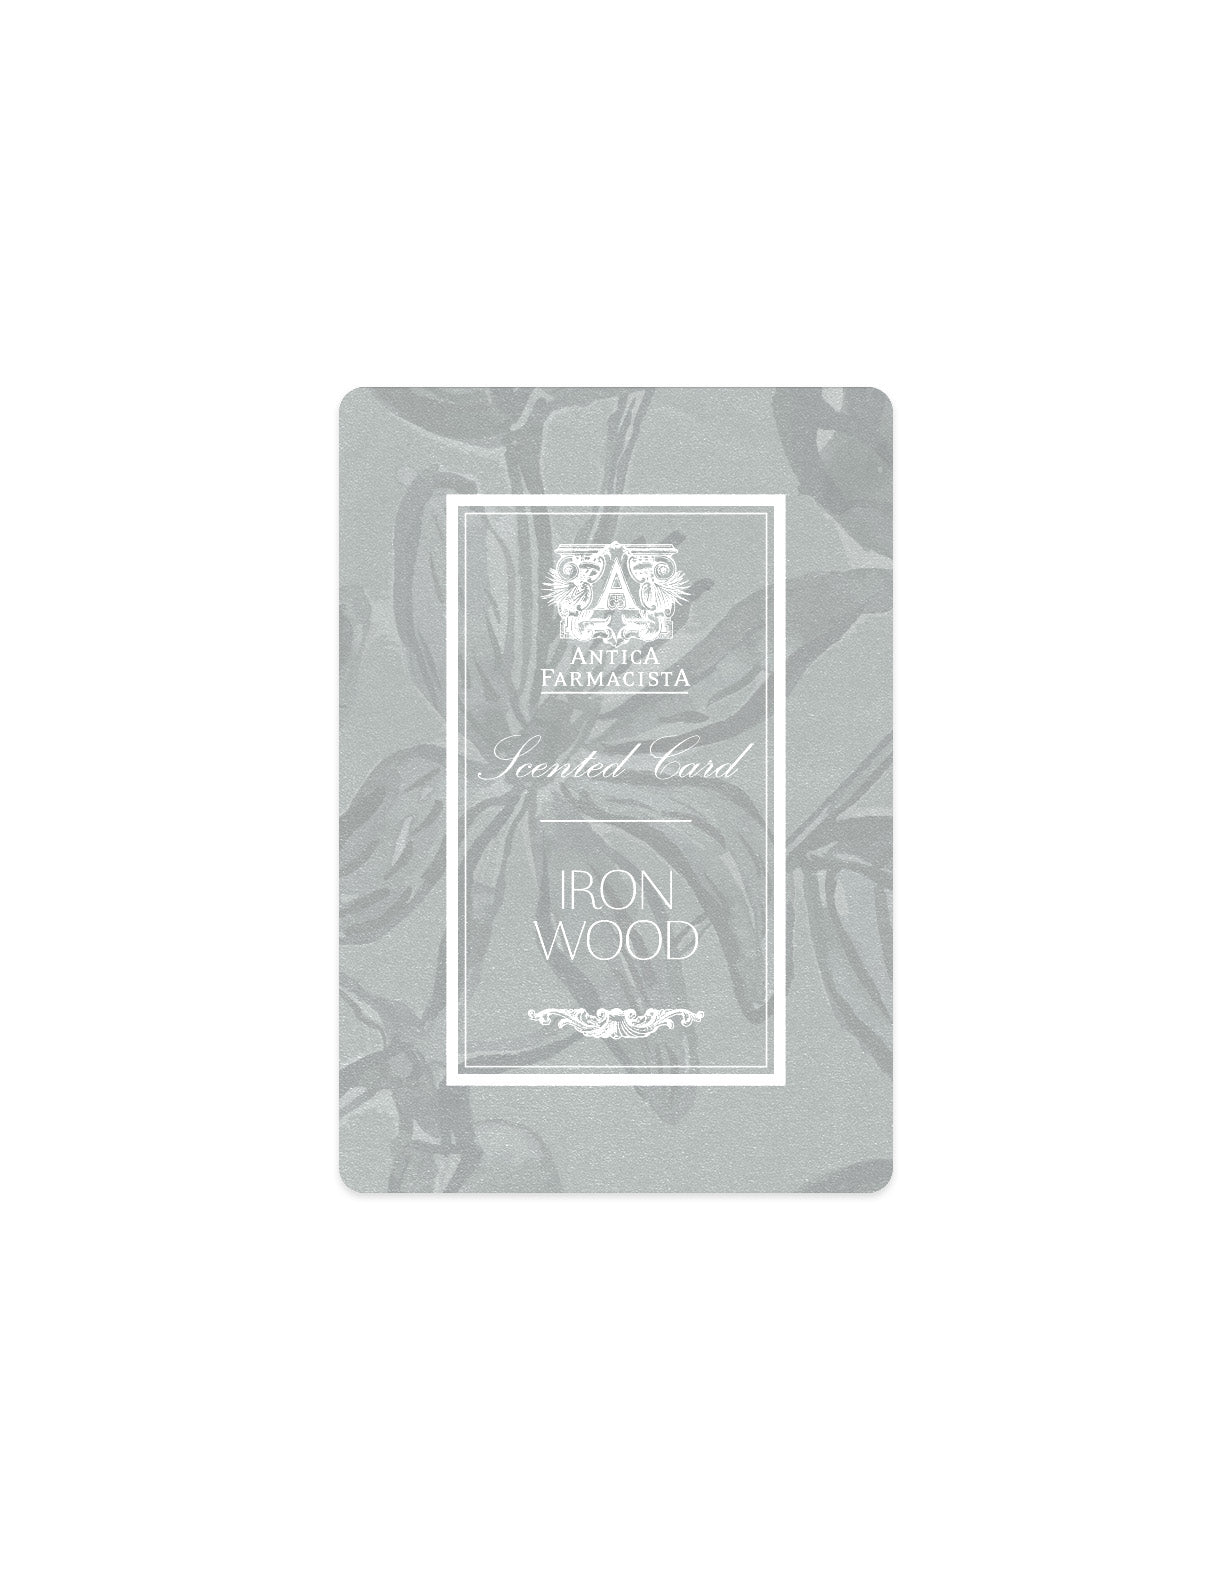 Scented Card - Ironwood